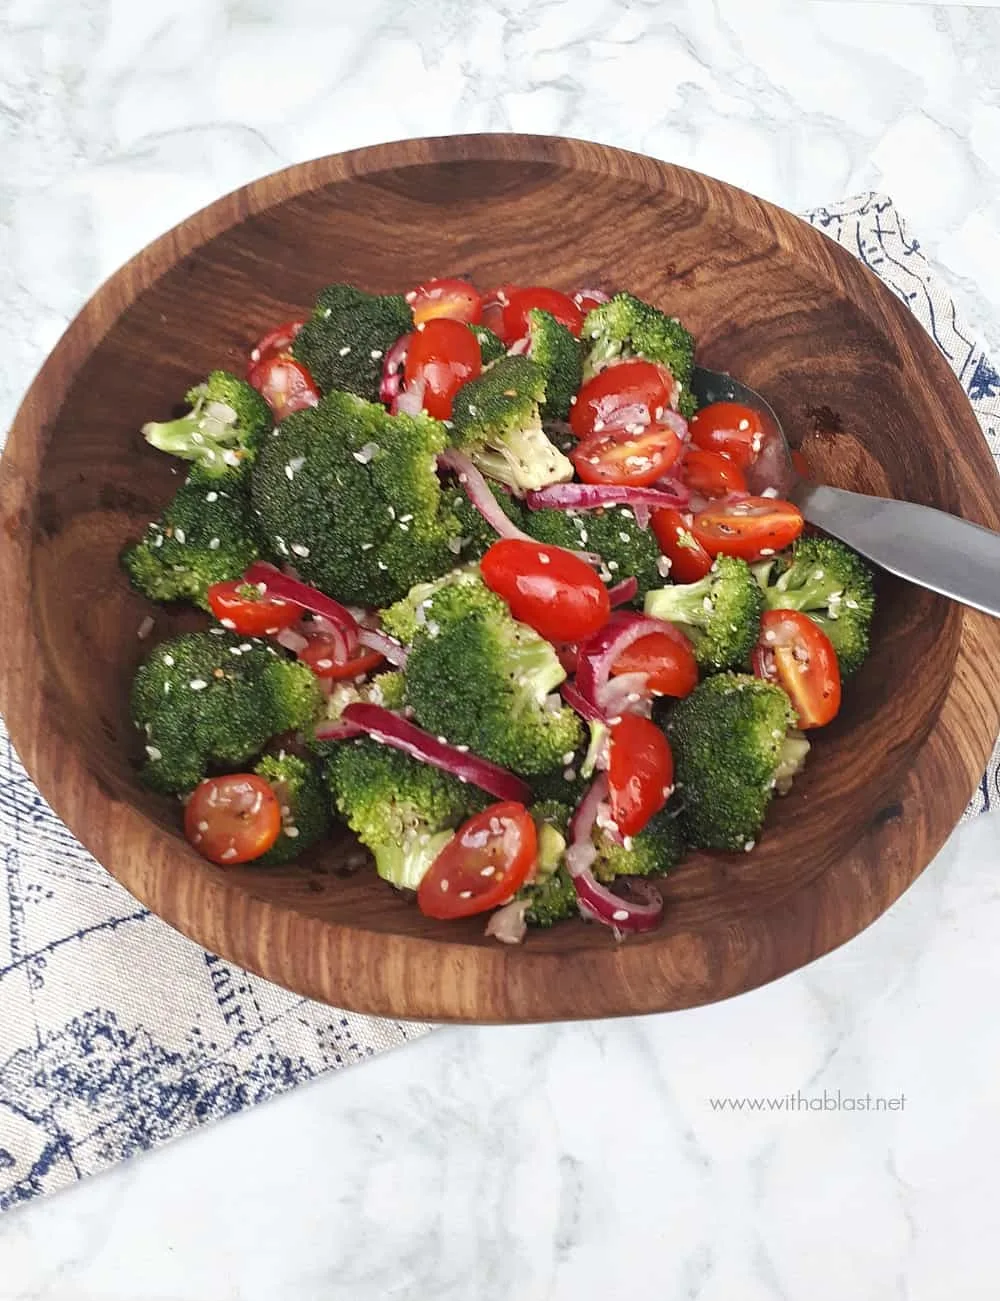 Marinated Broccoli Salad is a crunchy, delicious salad and a definite must-have recipe for especially Broccoli lovers [make-ahead friendly recipe]